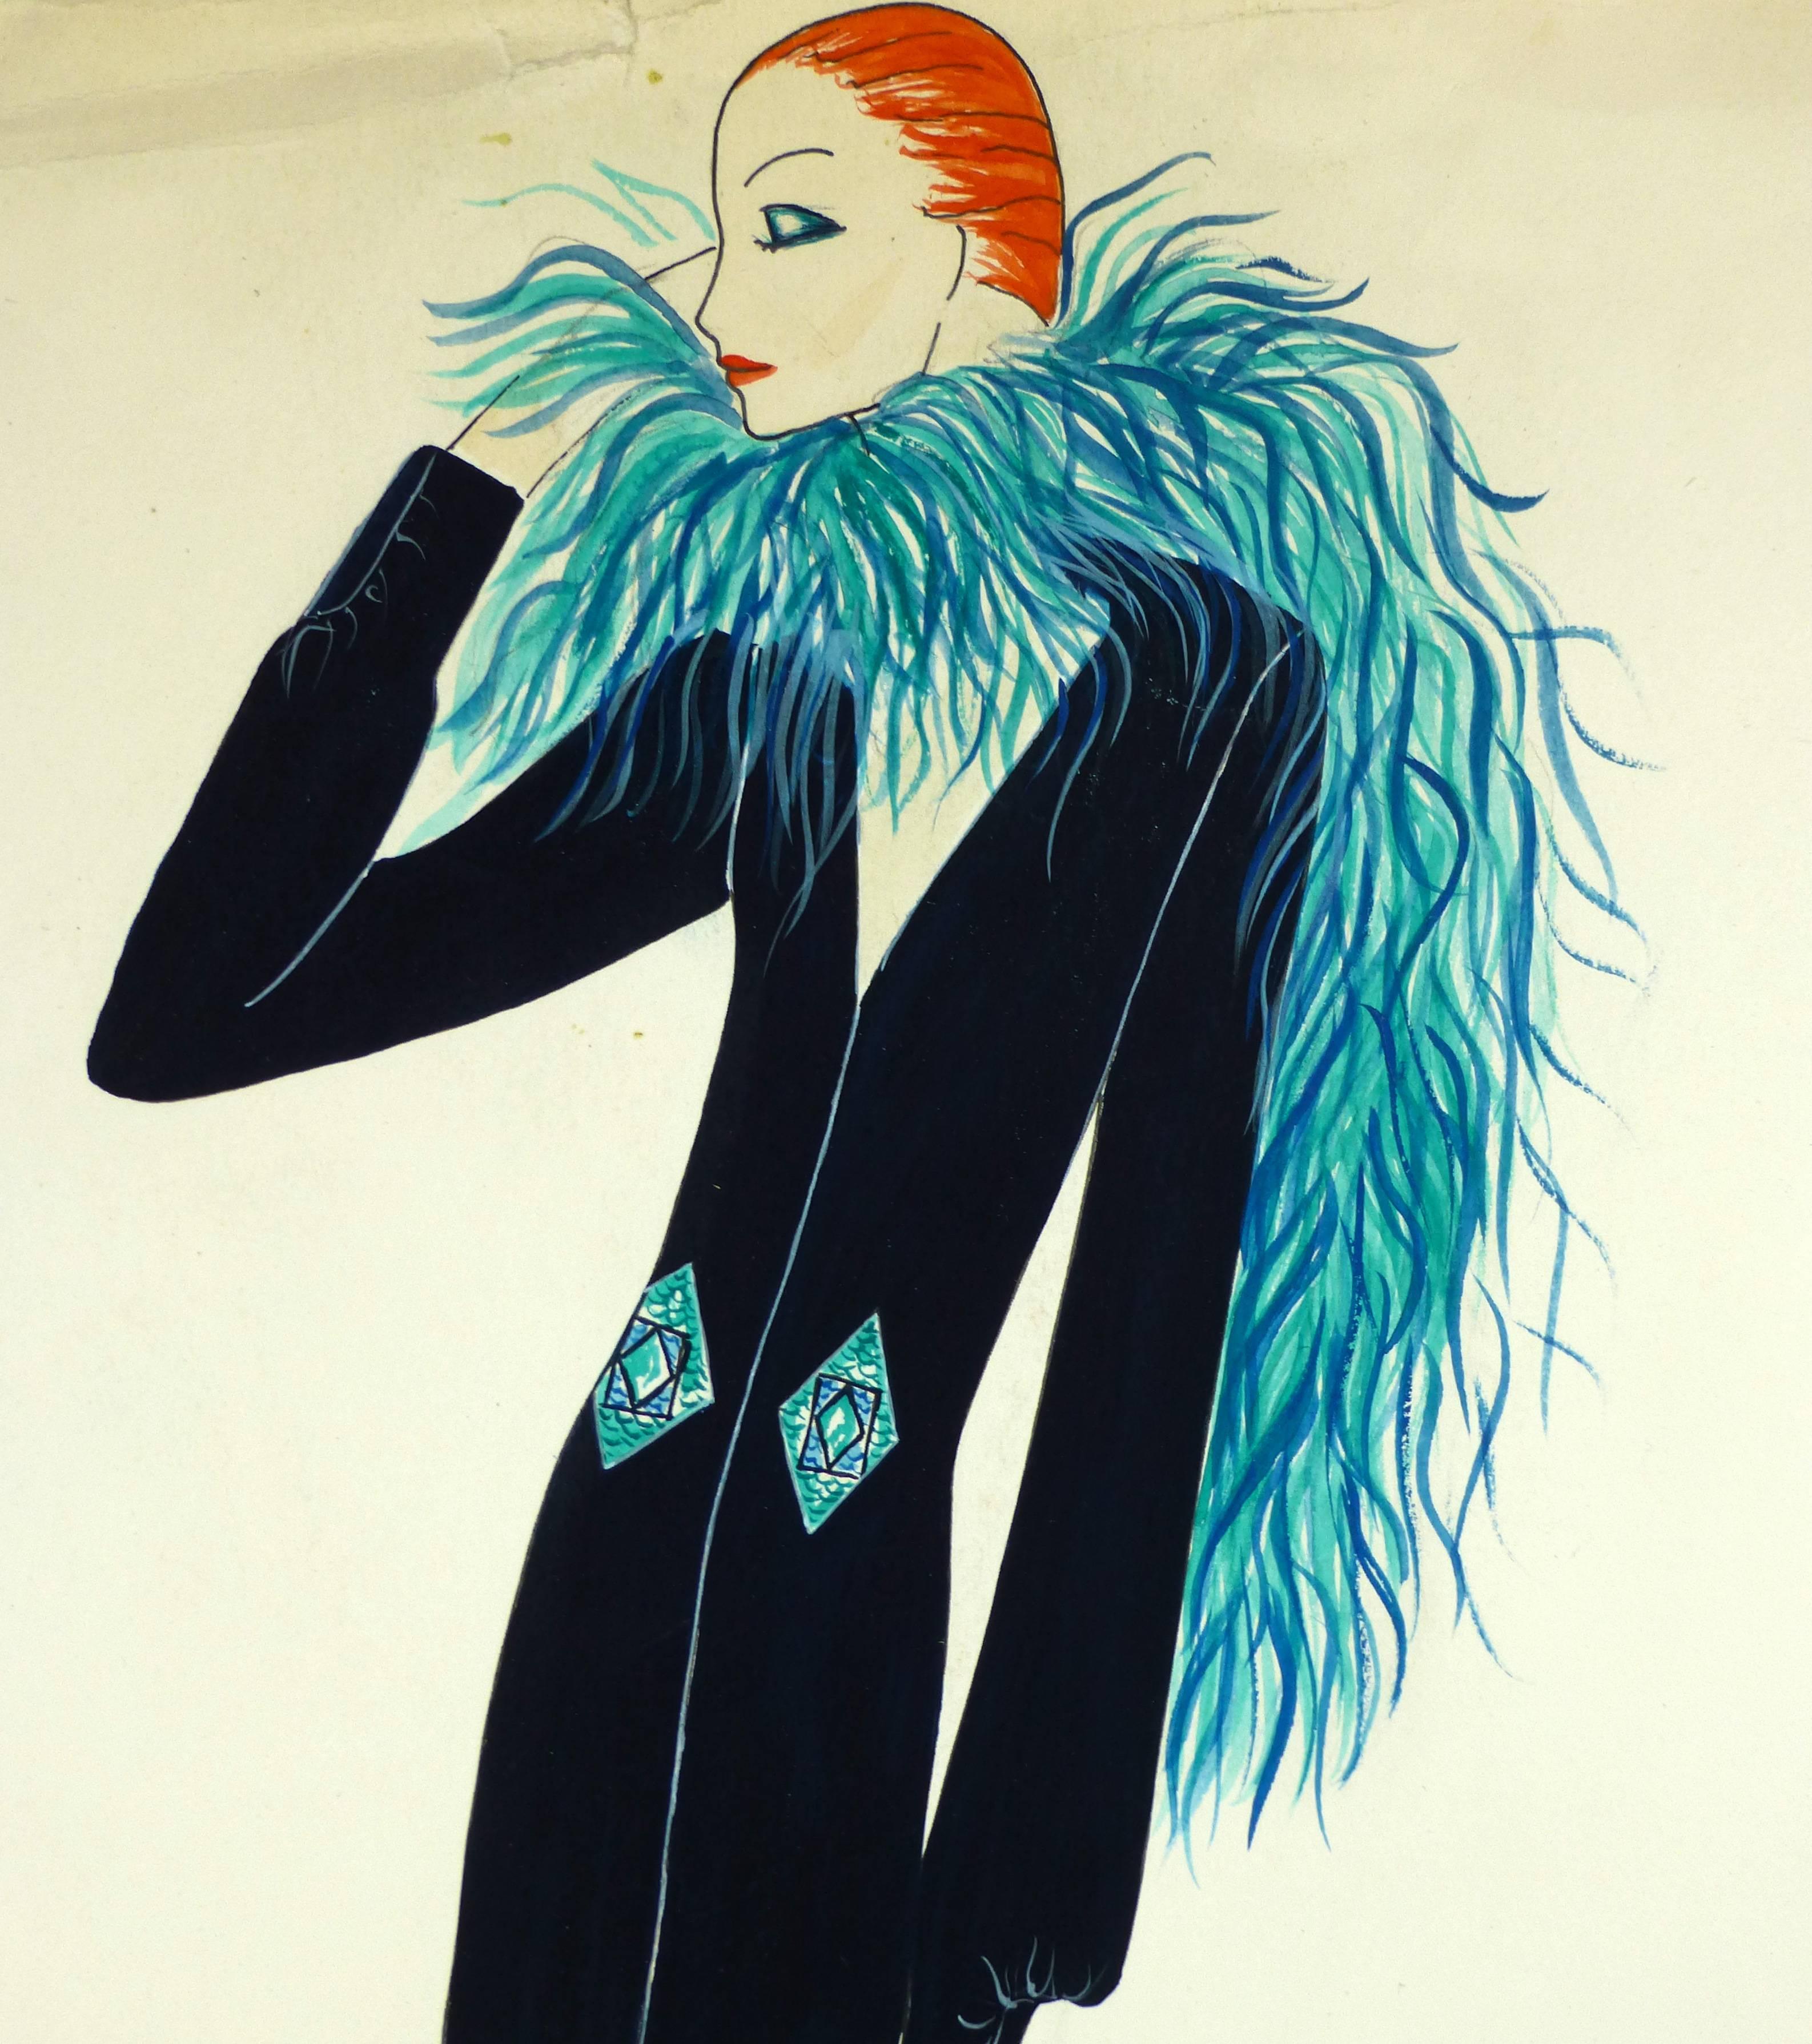 Gouache painting of elegant woman with bright blue boa, 1990s.  Signed lower right.

Original artwork on paper displayed on a white mat with a gold border. Archival plastic sleeve and Certificate of Authenticity included. Artwork, 25